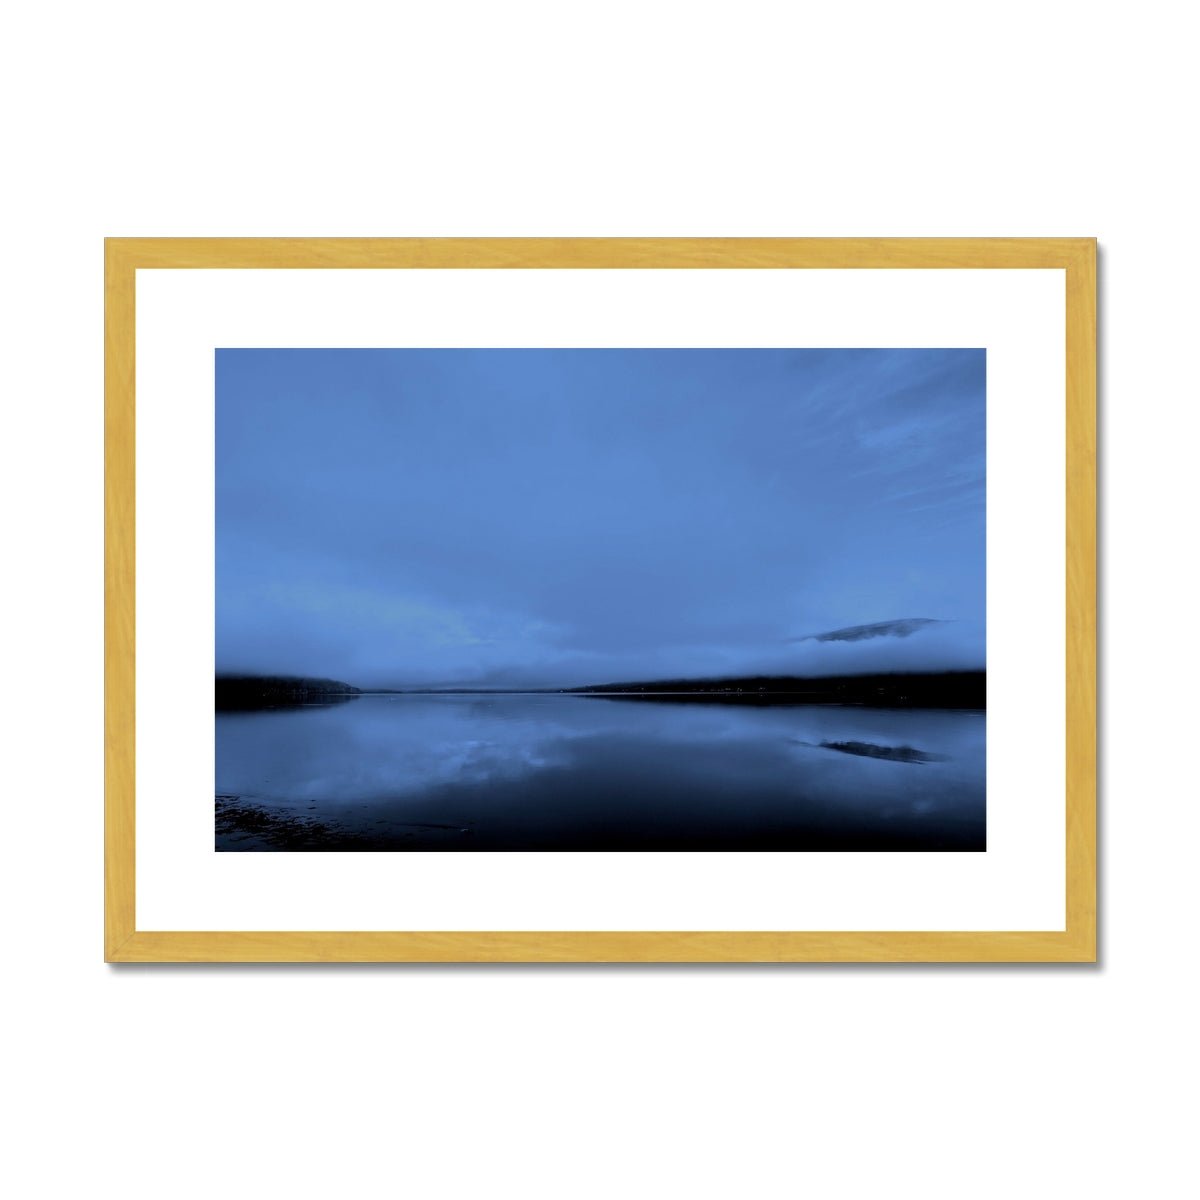 The Blue Hour Loch Fyne Painting | Antique Framed & Mounted Prints From Scotland-Antique Framed & Mounted Prints-Scottish Lochs & Mountains Art Gallery-A2 Landscape-Gold Frame-Paintings, Prints, Homeware, Art Gifts From Scotland By Scottish Artist Kevin Hunter